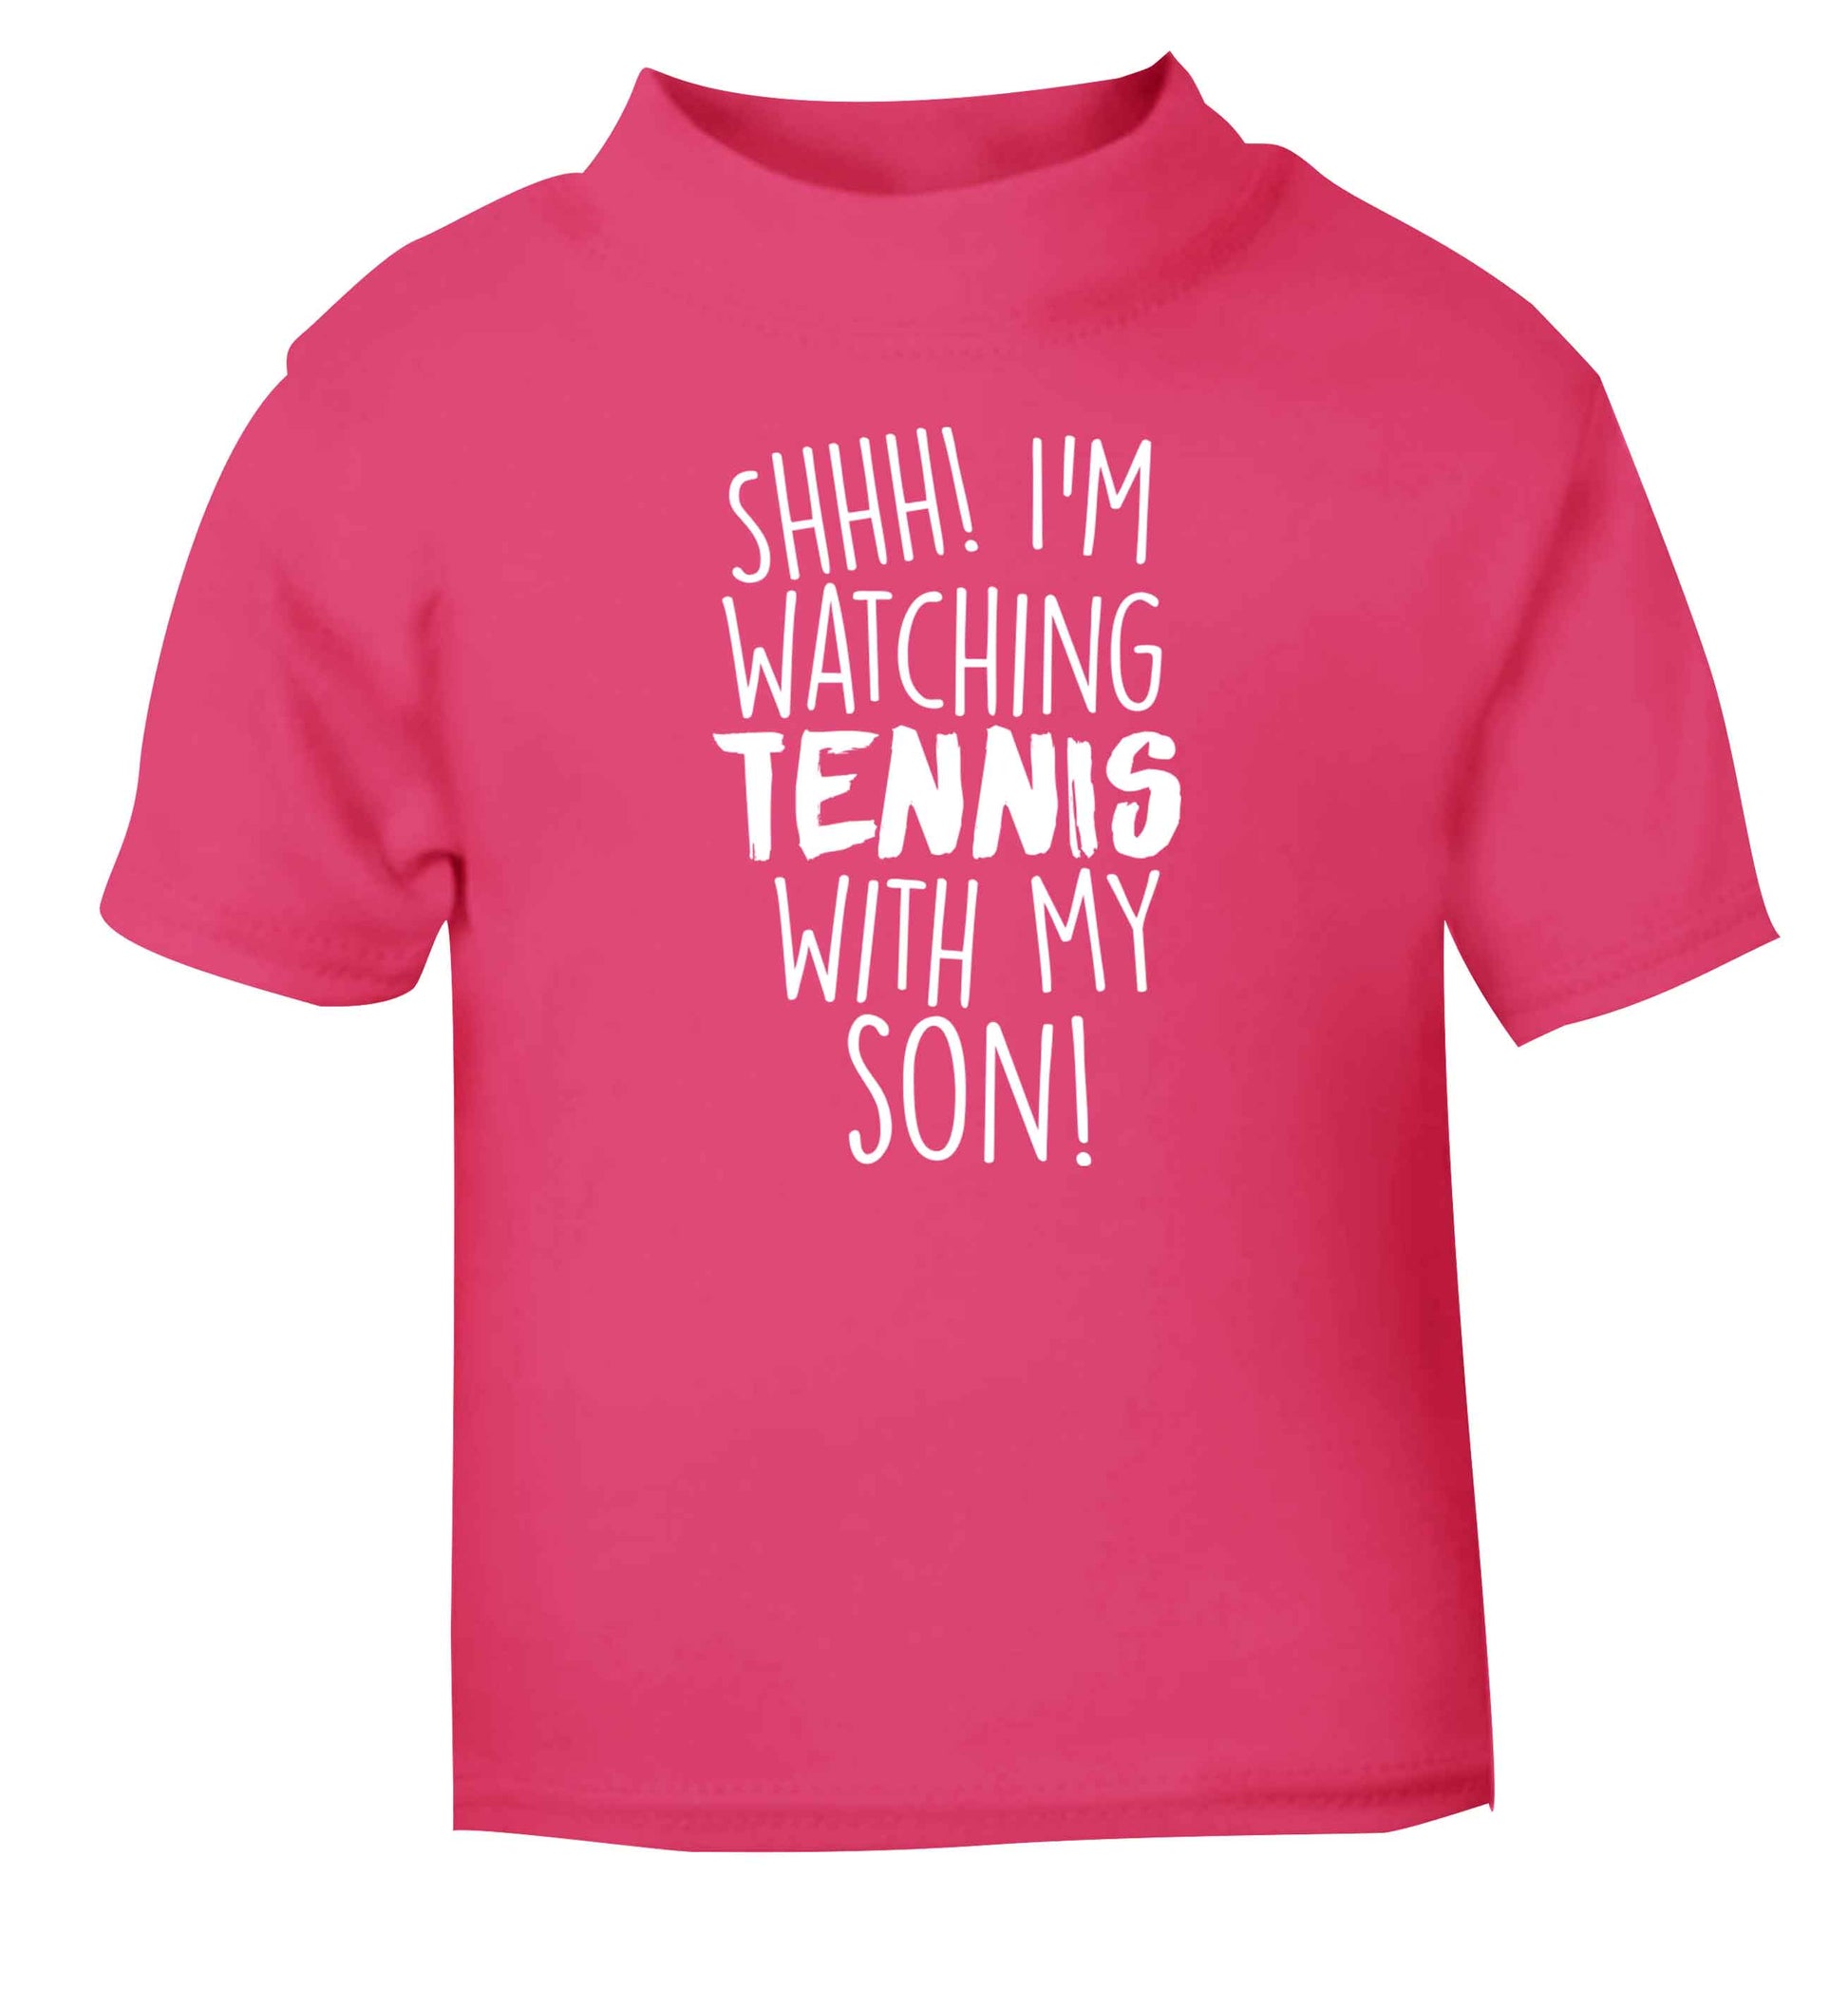 Shh! I'm watching tennis with my son! pink Baby Toddler Tshirt 2 Years